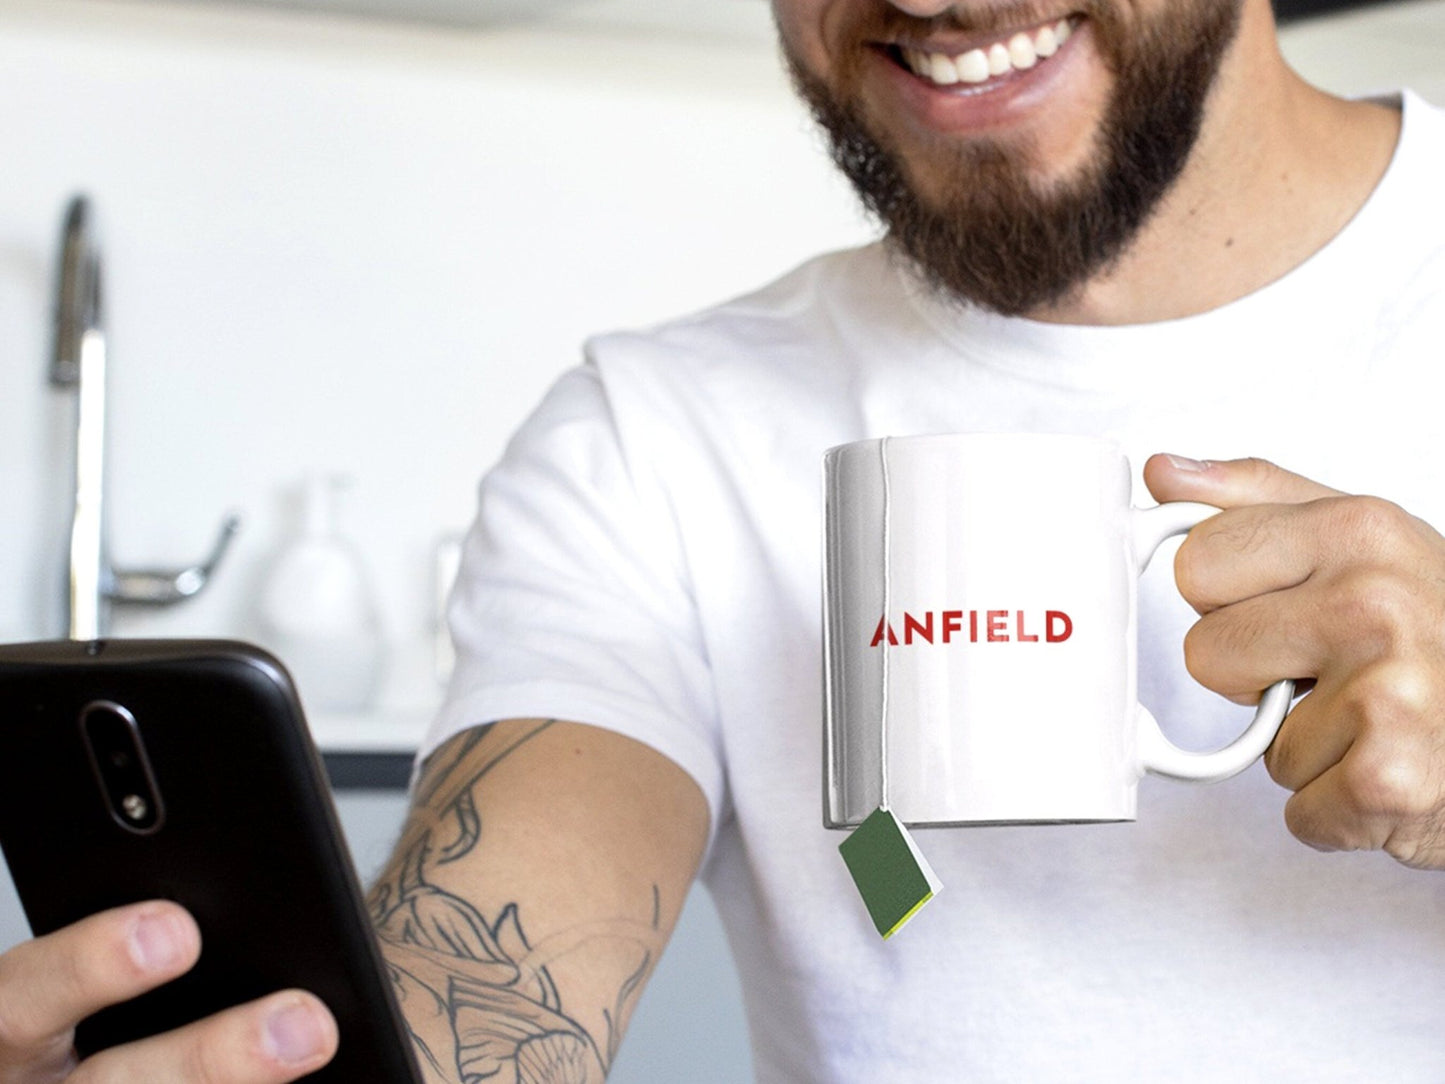 Liverpool Gift - Anfield Mug Present - Contemporary Illustration - Best Gift for Him Her - 18th Birthday Gift - Turf Football Art